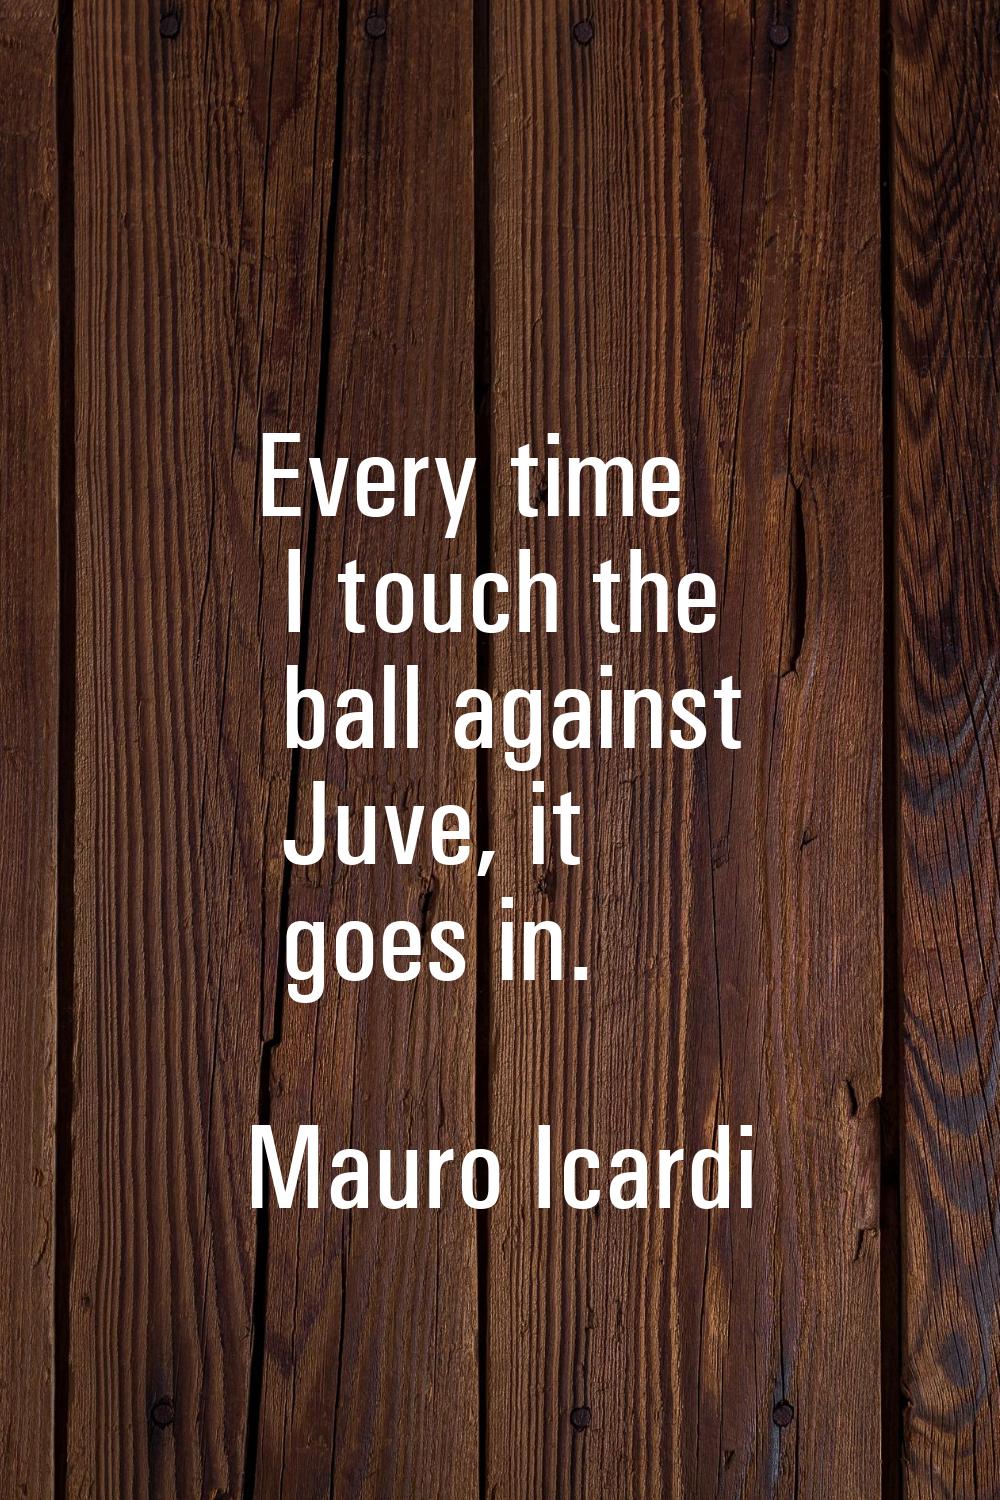 Every time I touch the ball against Juve, it goes in.